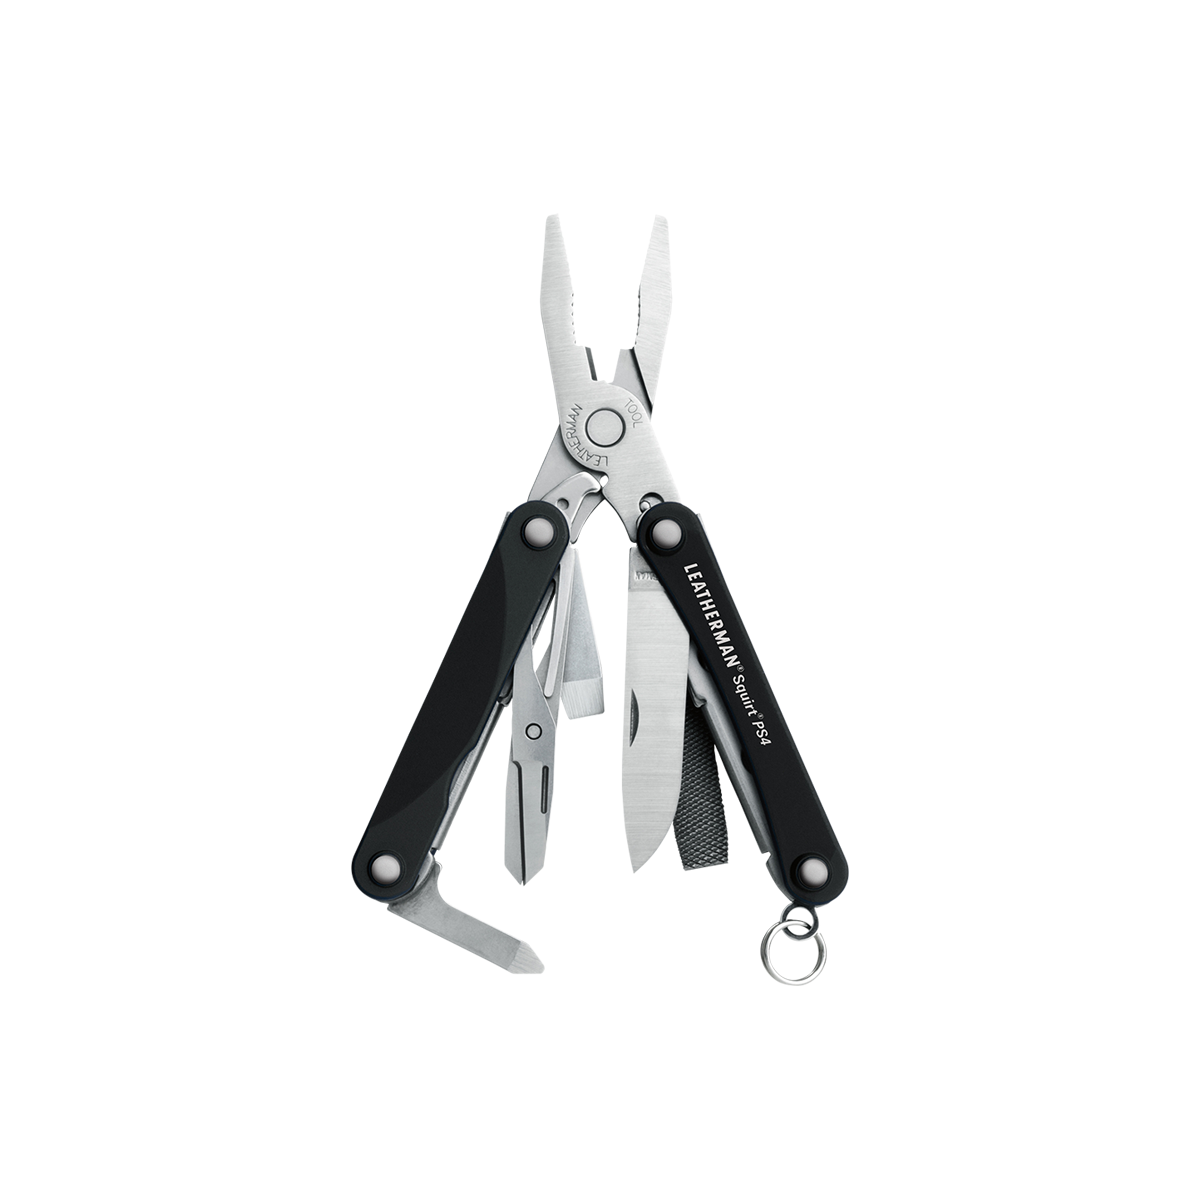 Leatherman-Squirt PS4